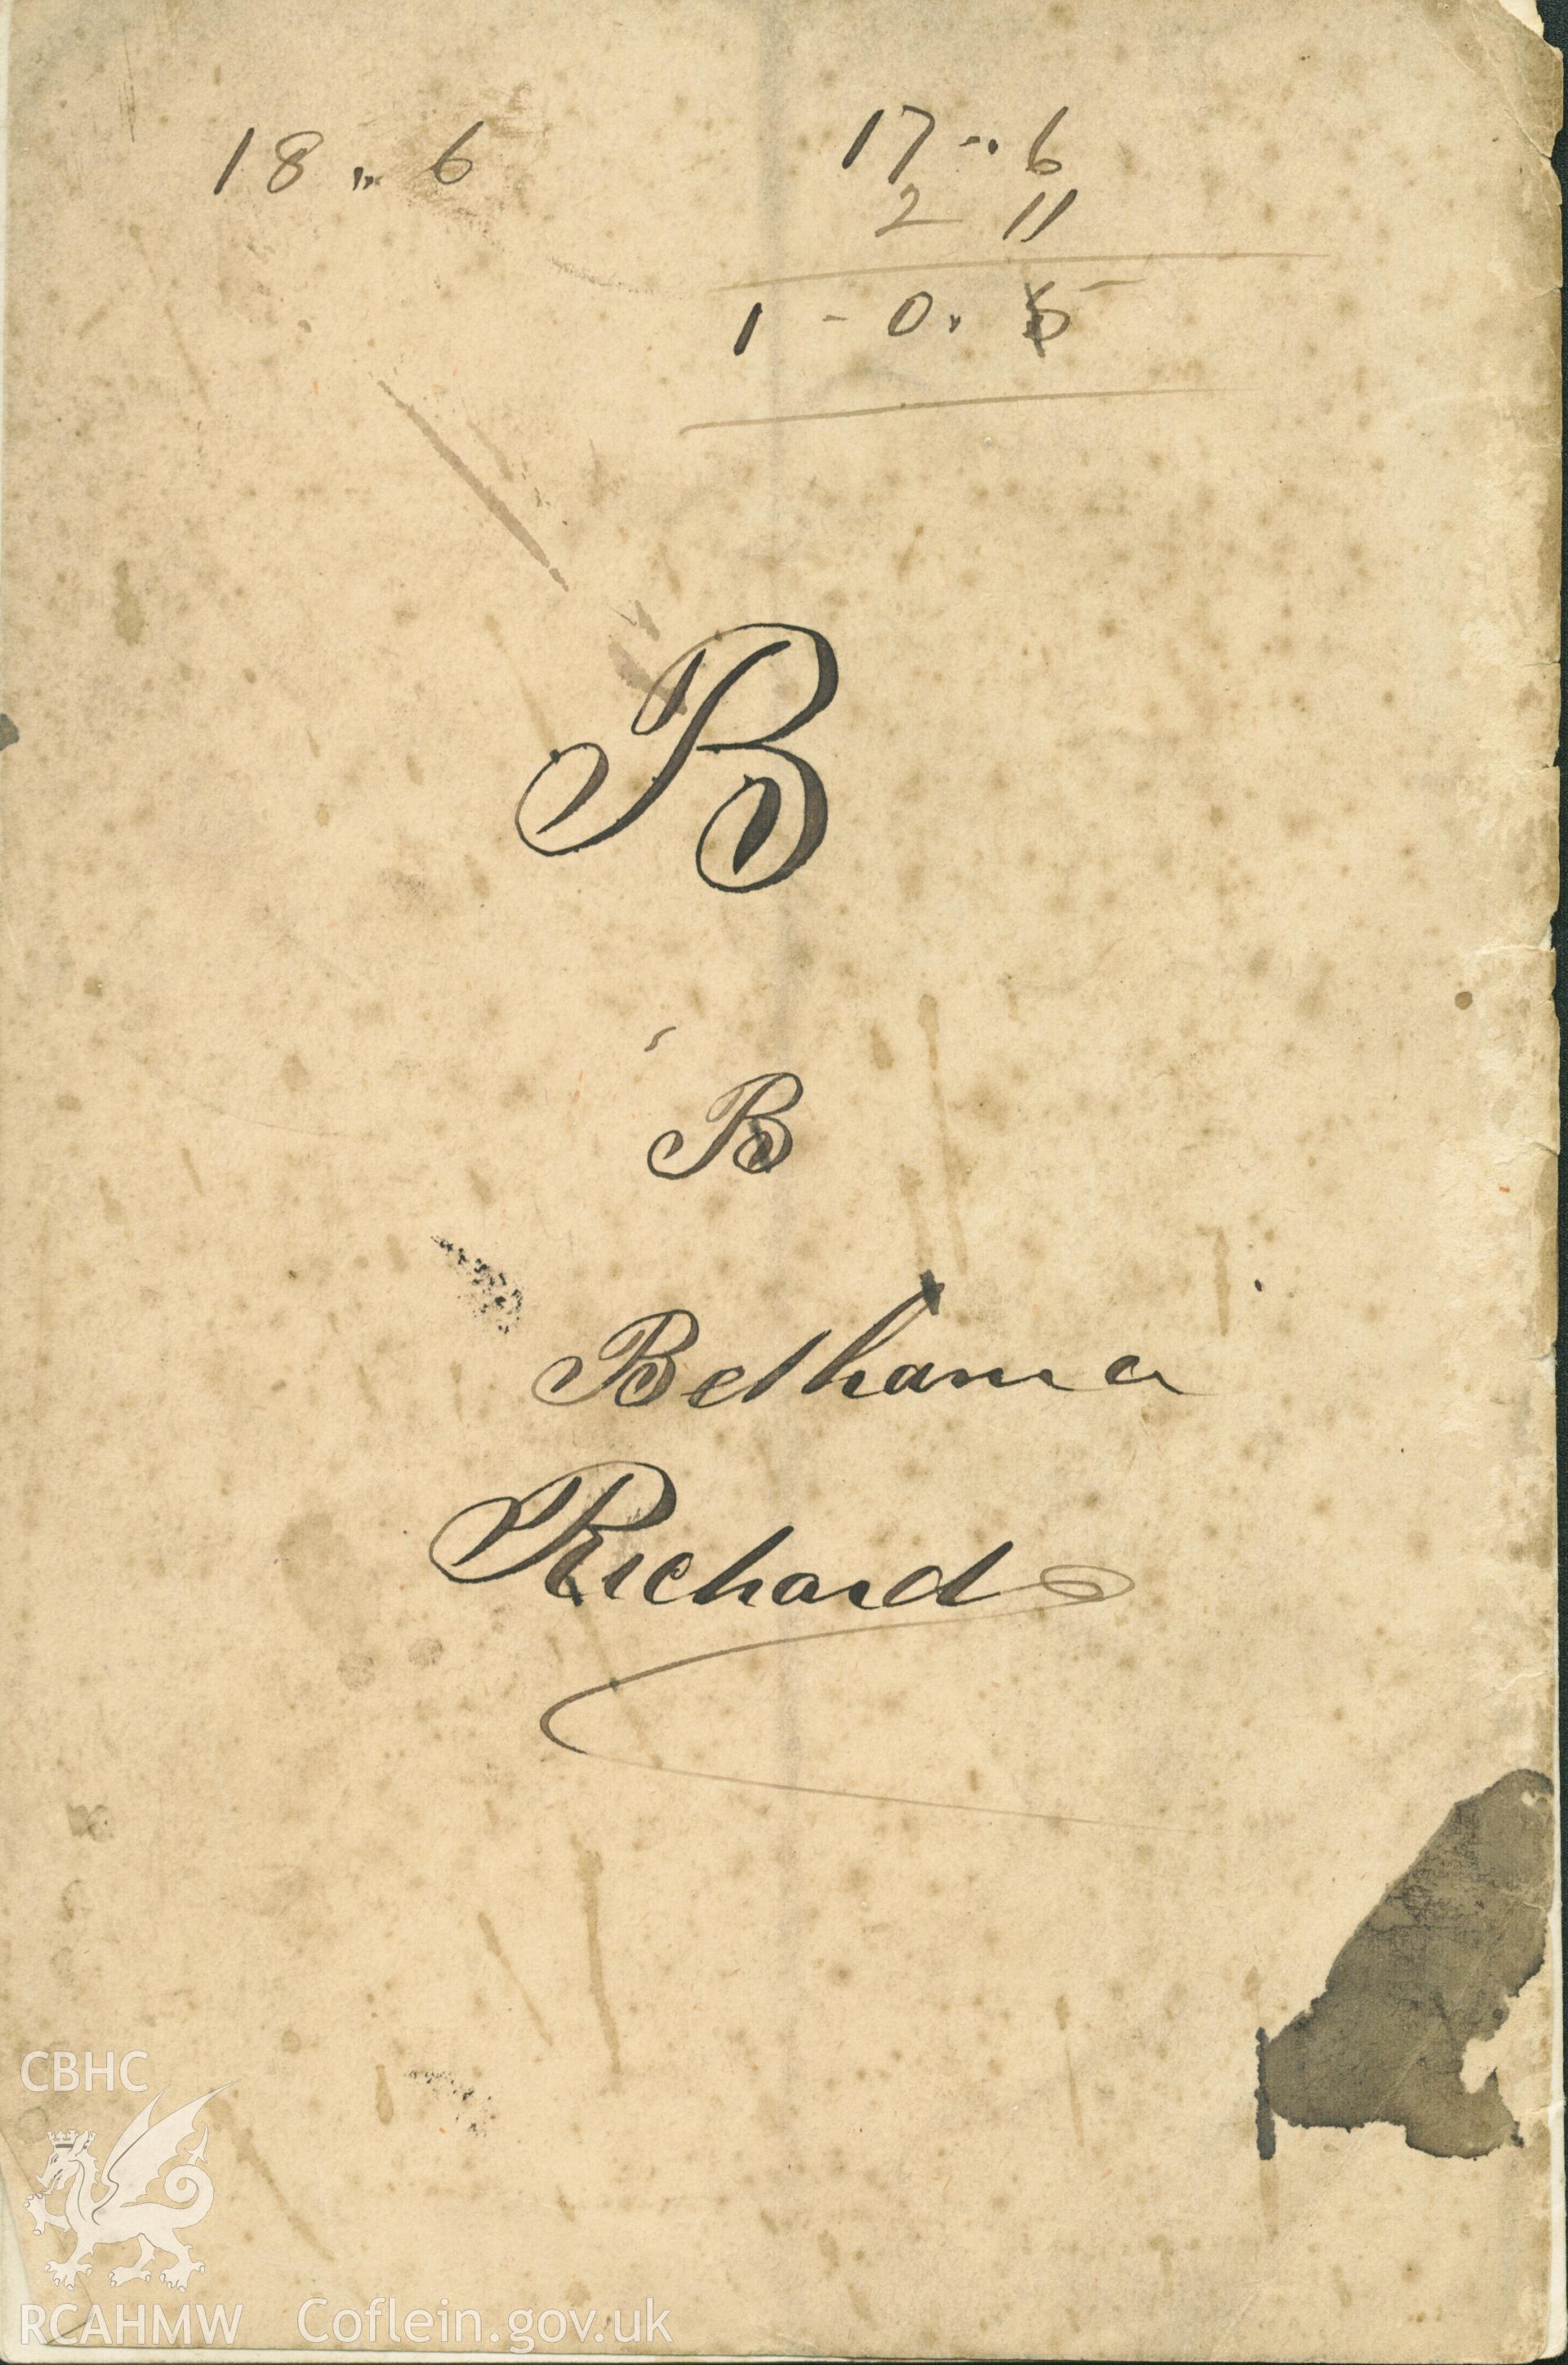 Handwriting on the reverse of a copy of the programme for the induction of Rev Richard Edwards, May 1888. Donated to the RCAHMW by Cyril Philips as part of the Digital Dissent Project.